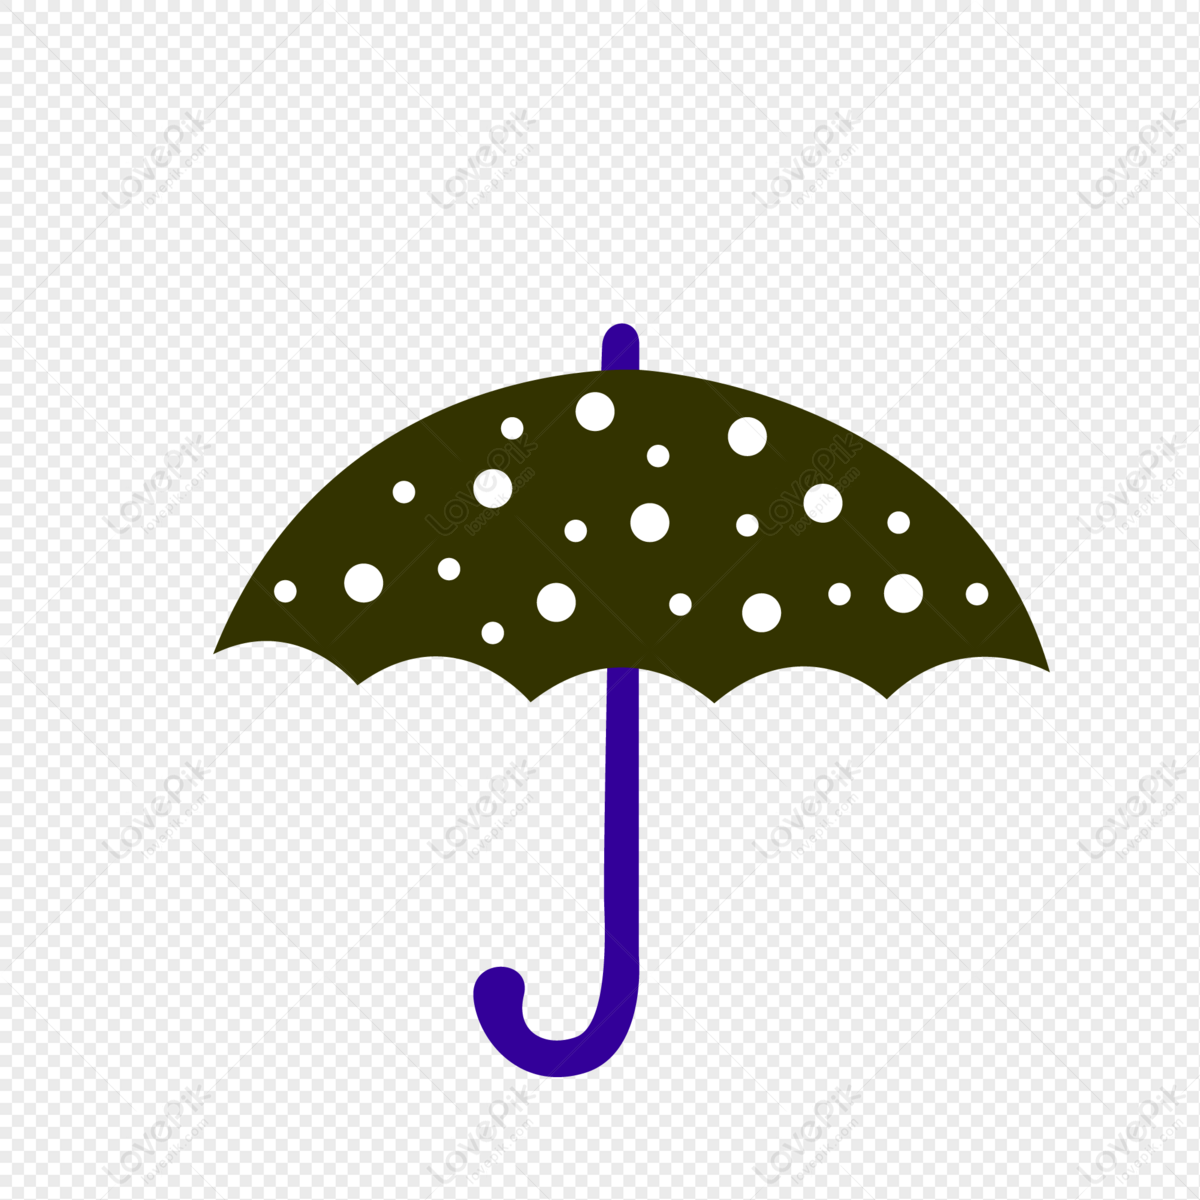 Black Umbrella PNG Hd Transparent Image And Clipart Image For Free Download  - Lovepik | 401454544